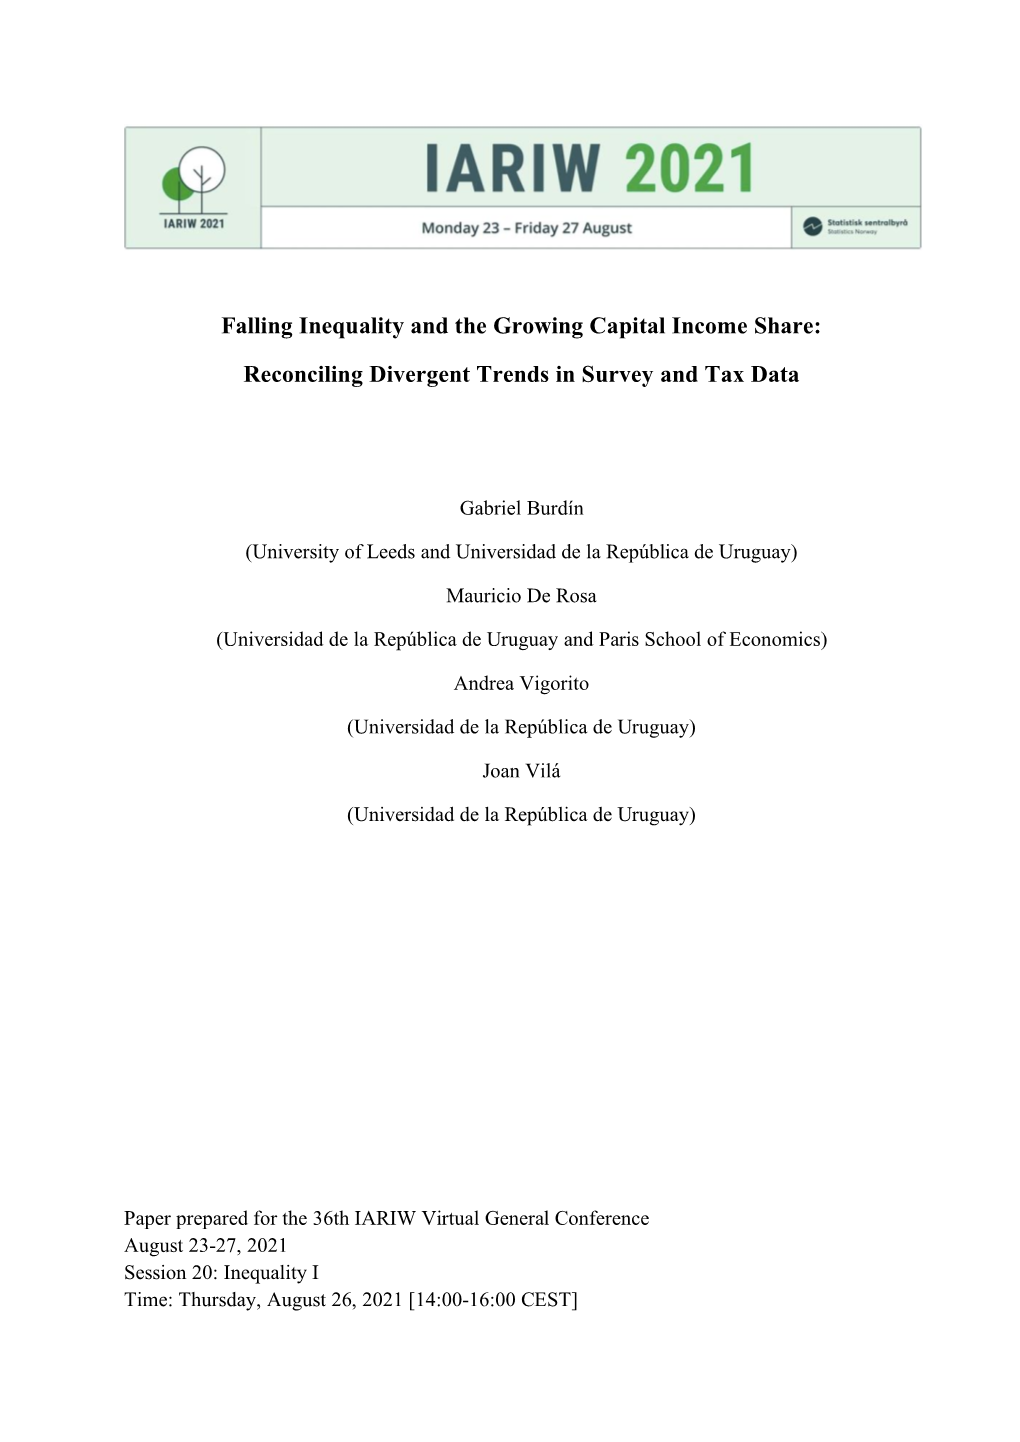 Falling Inequality and the Growing Capital Income Share: Reconciling Divergent Trends in Survey and Tax Data